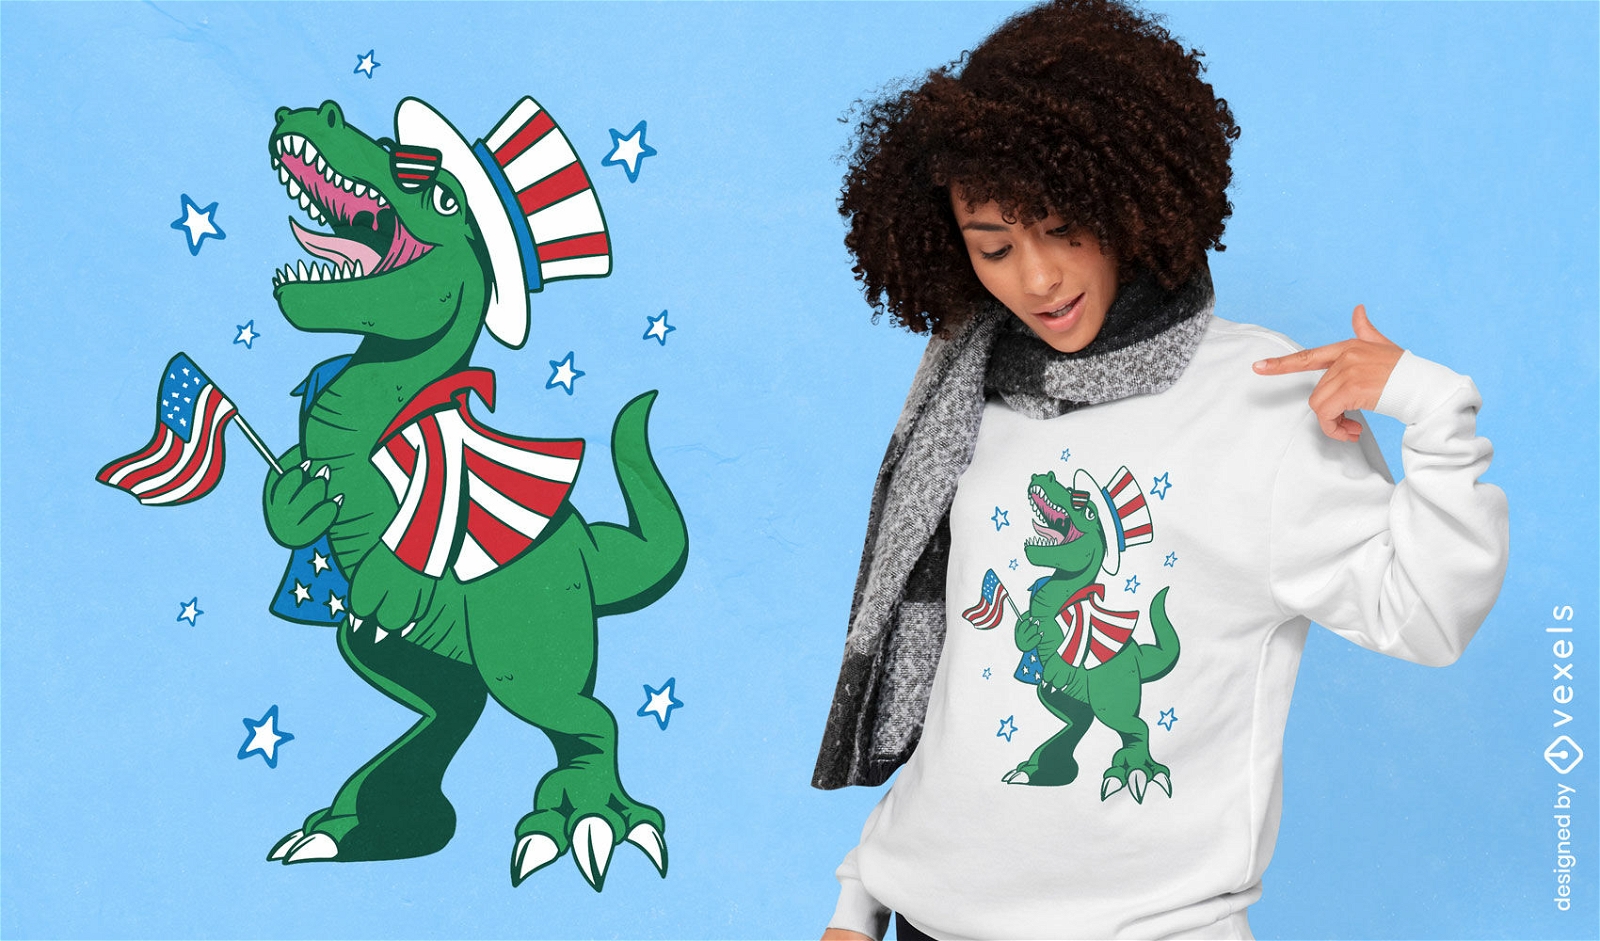 Independence day dinosaur character t-shirt design